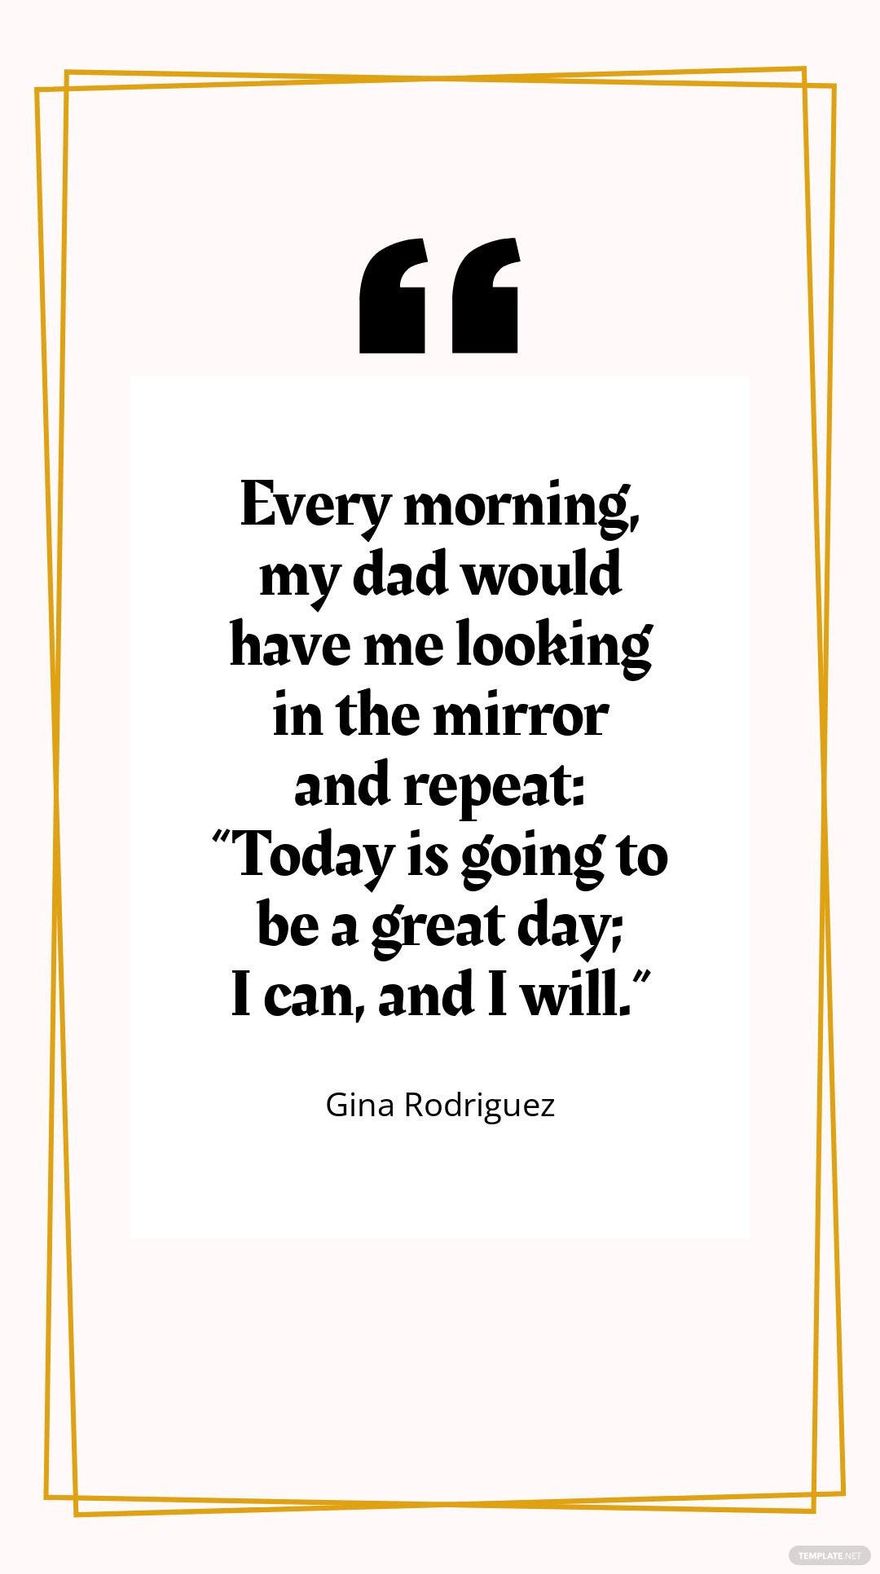 Gina Rodriguez - Every morning, my dad would have me looking in the mirror and repeat: “Today is going to be a great day; I can, and I will.”